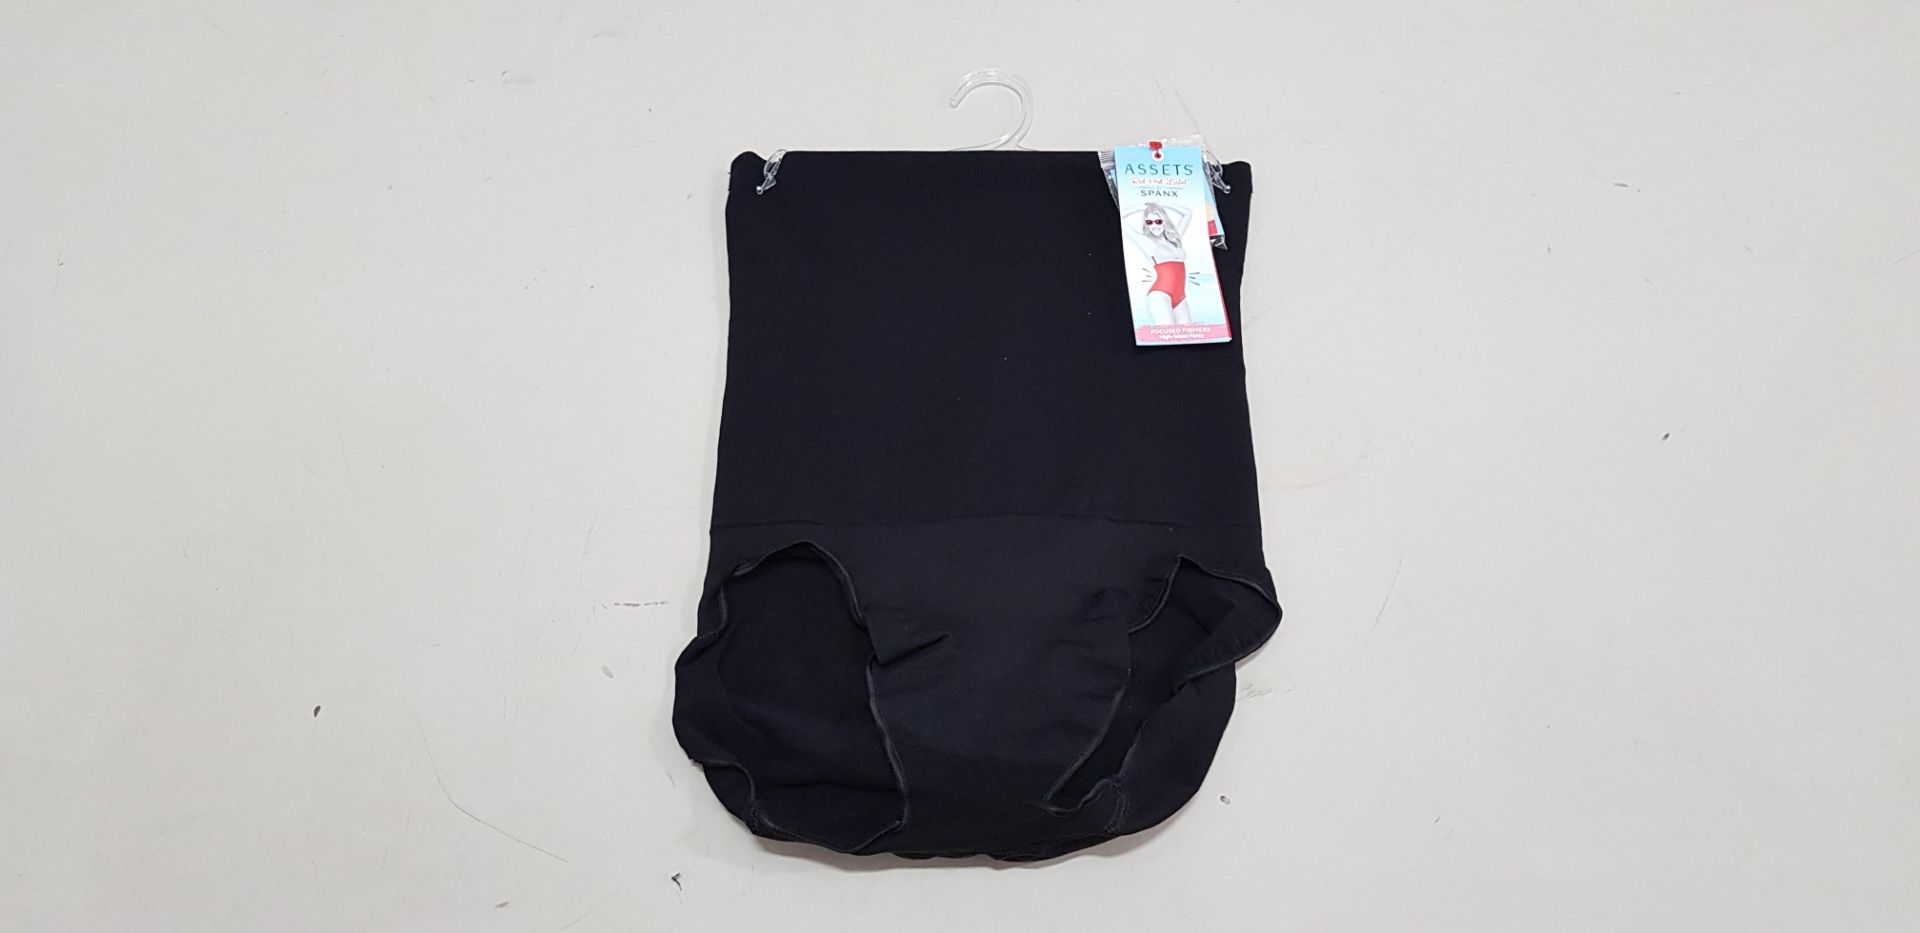 11 X BRAND NEW SPANX BLACK HIGH WAISTED PANTIES ALL IN SIZE 1 X